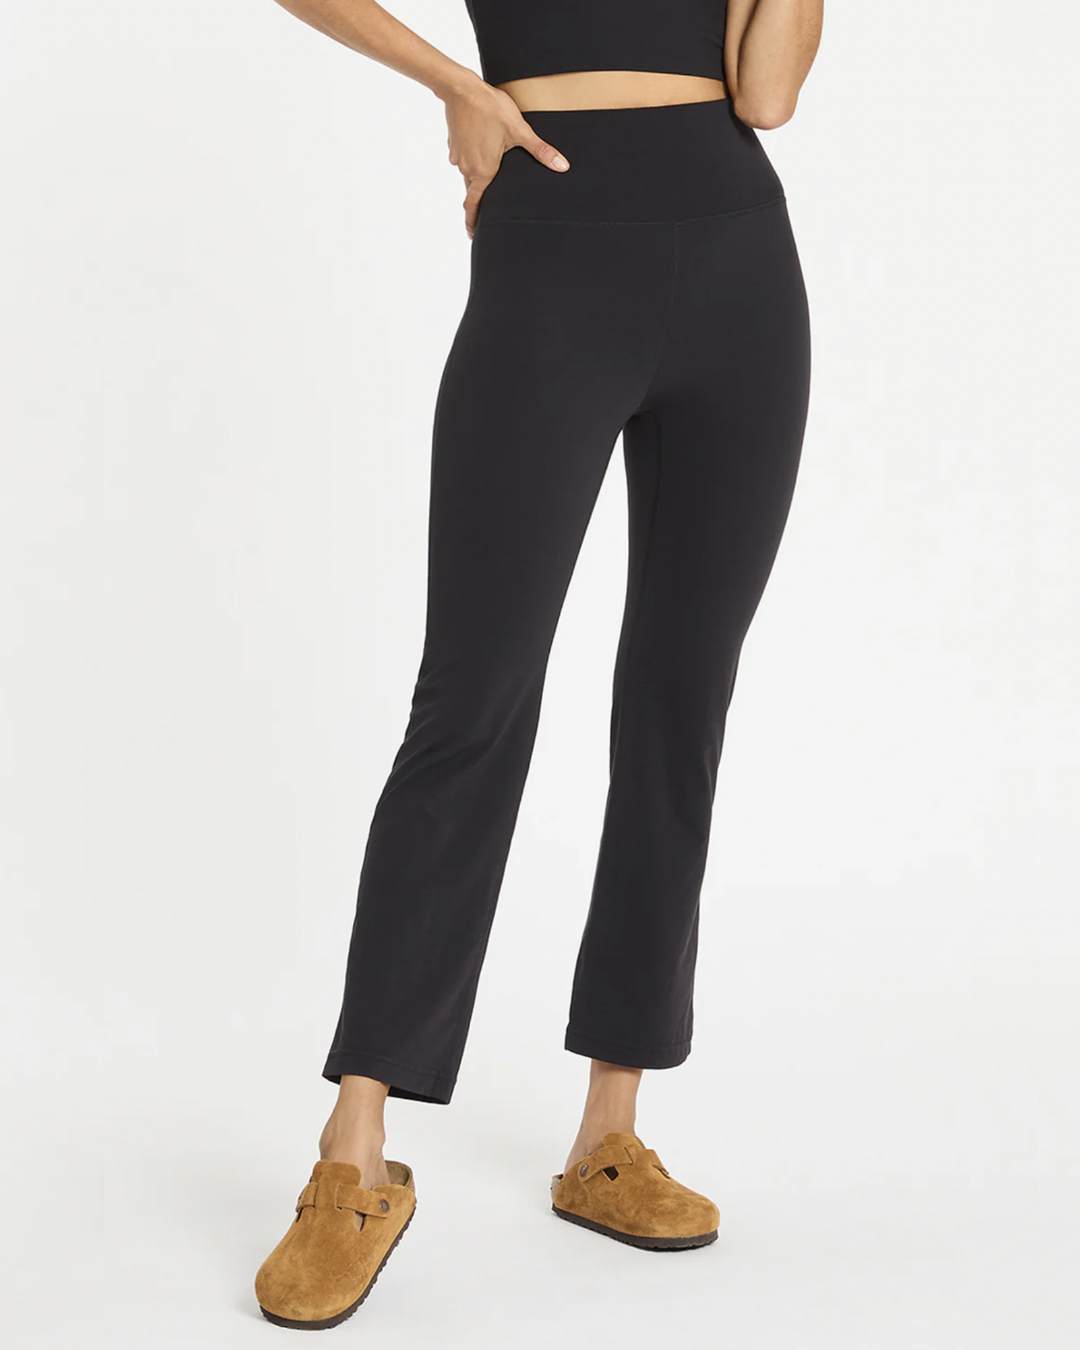 In Motion Cropped Flare Pant - Black Activewear by Nimble - Prae Wellness